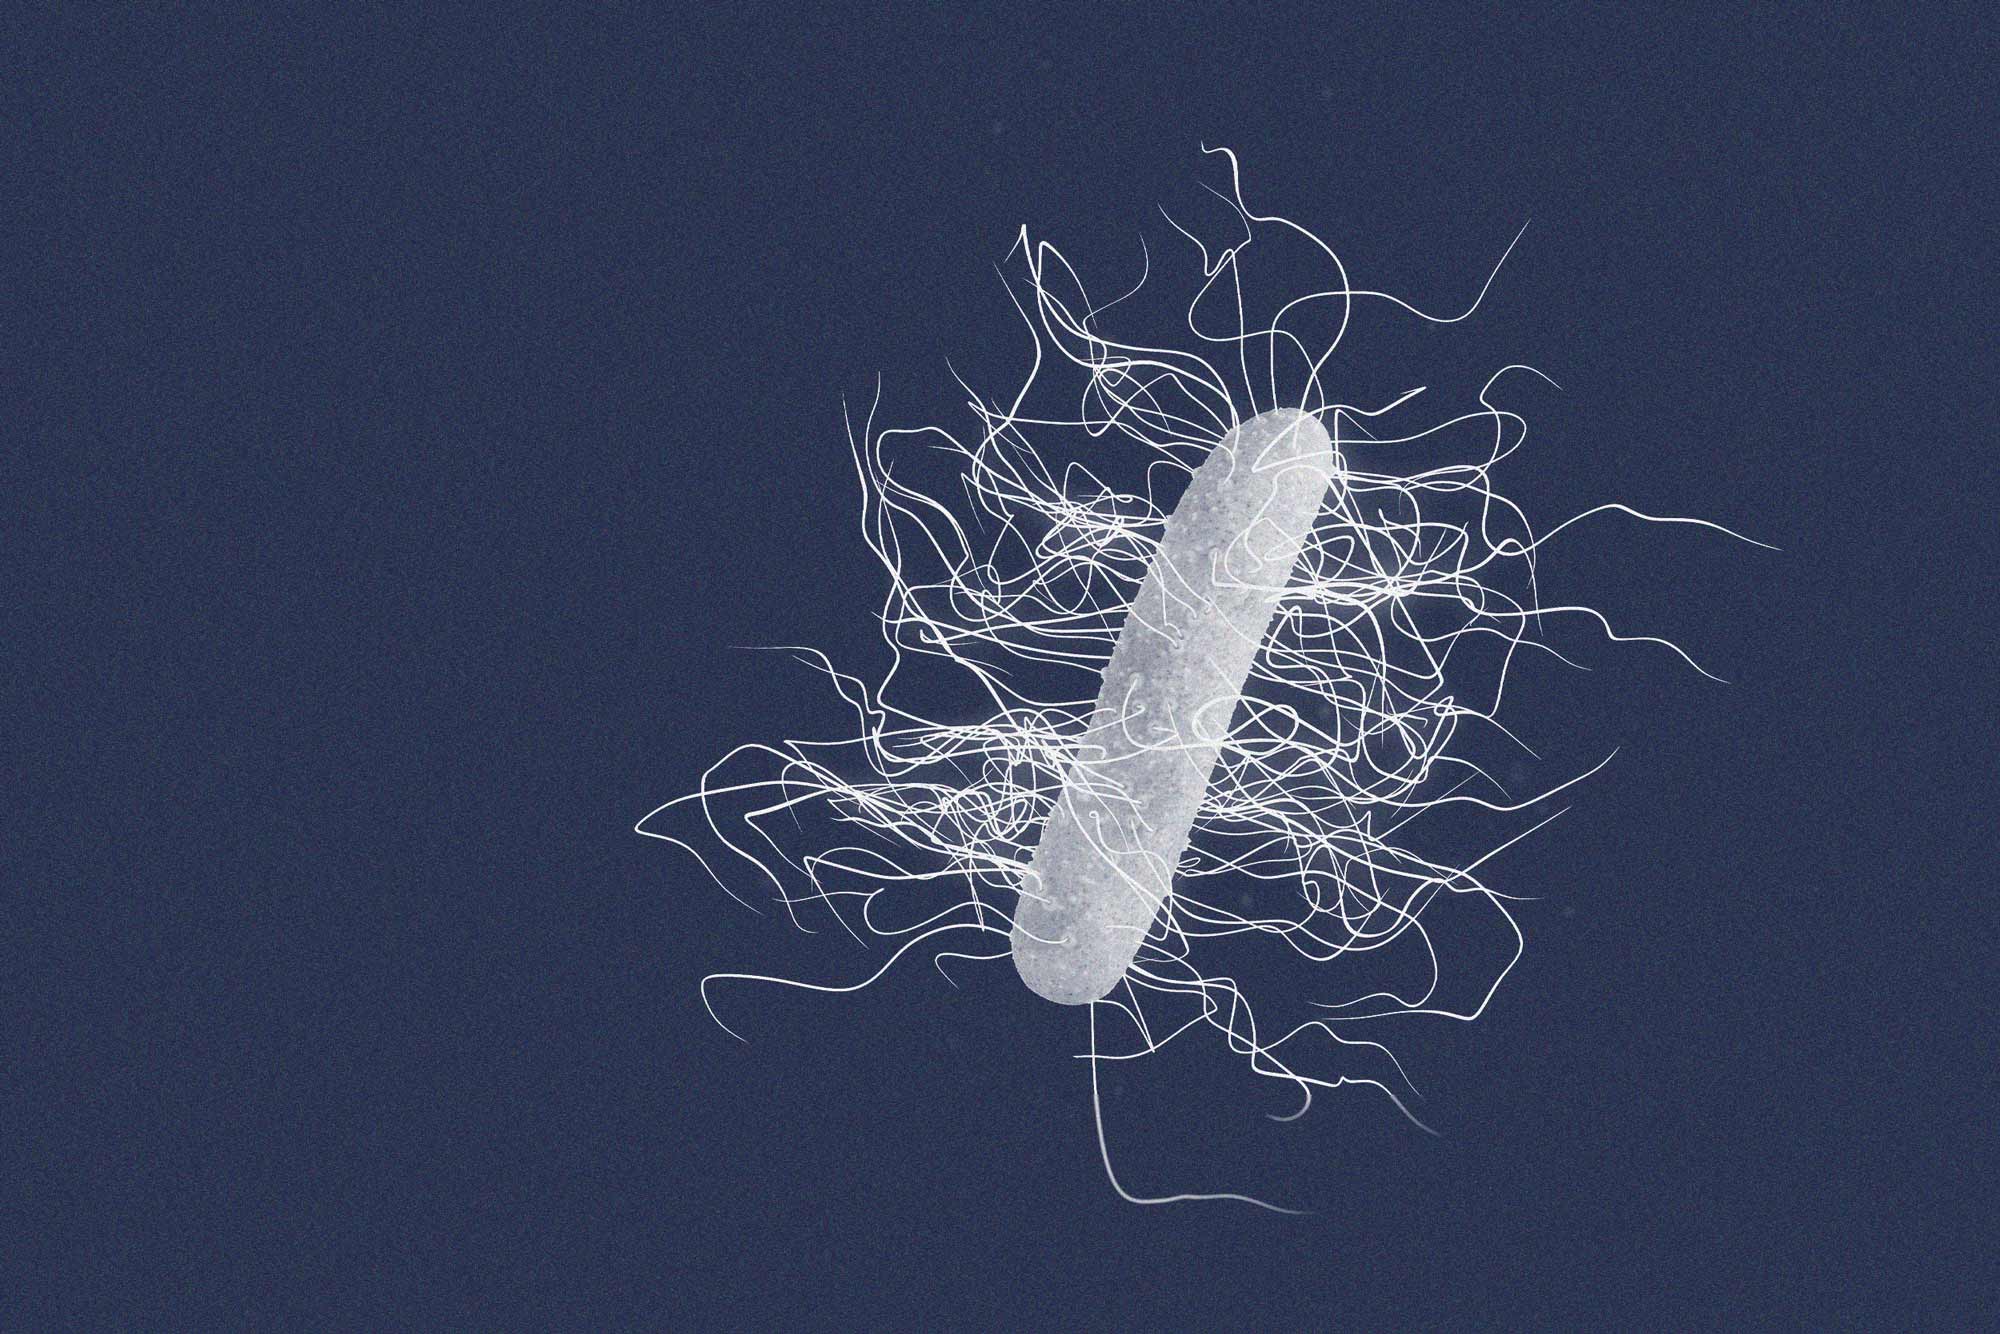 Illustrations of bacteria, a white oval with a lot of white squiggily lines like hair coming off it